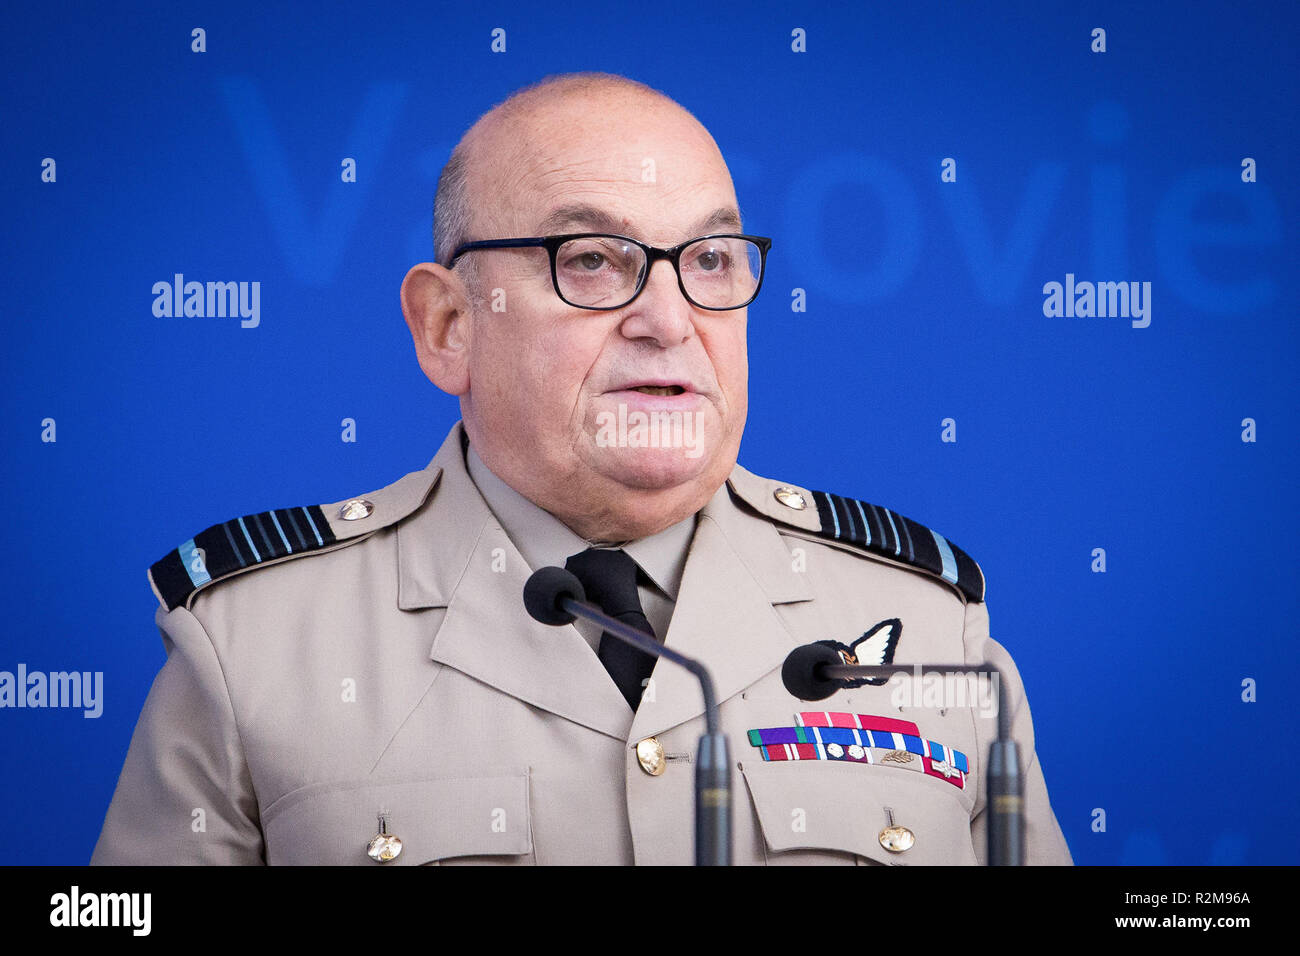 Chairman of the NATO Military Committee, Air Chief Marshal Sir Stuart Peach during the press conference summarizing the NATO Military Committee Conference meeting at Double Tree by Hilton hotel in Warsaw, Poland on 29 September 2018 Stock Photo